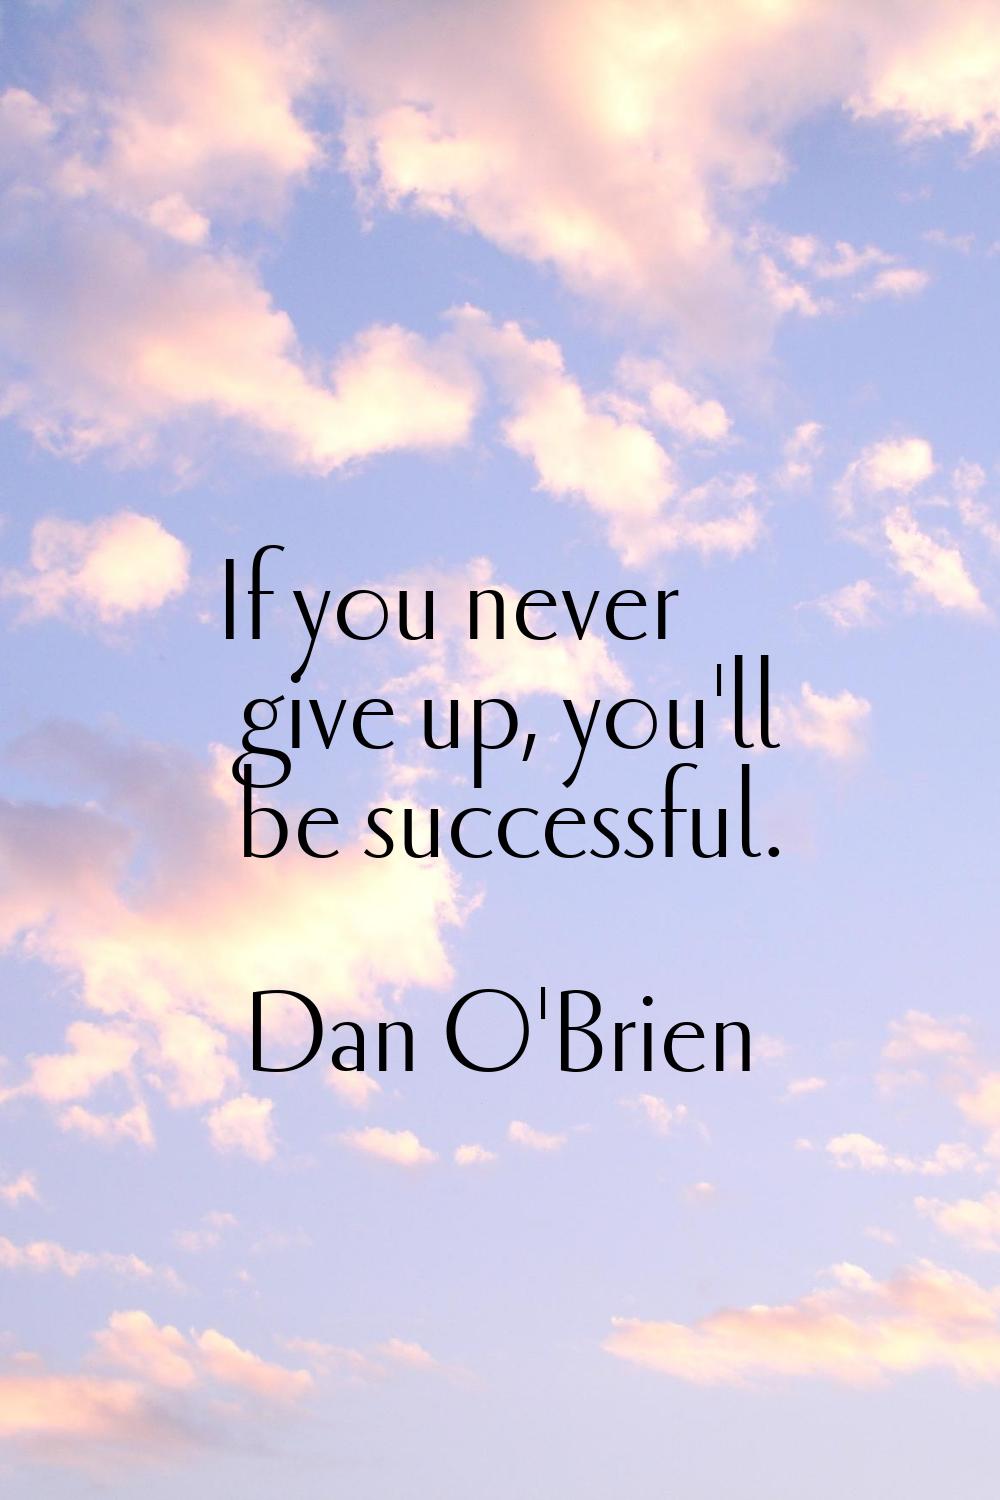 If you never give up, you'll be successful.